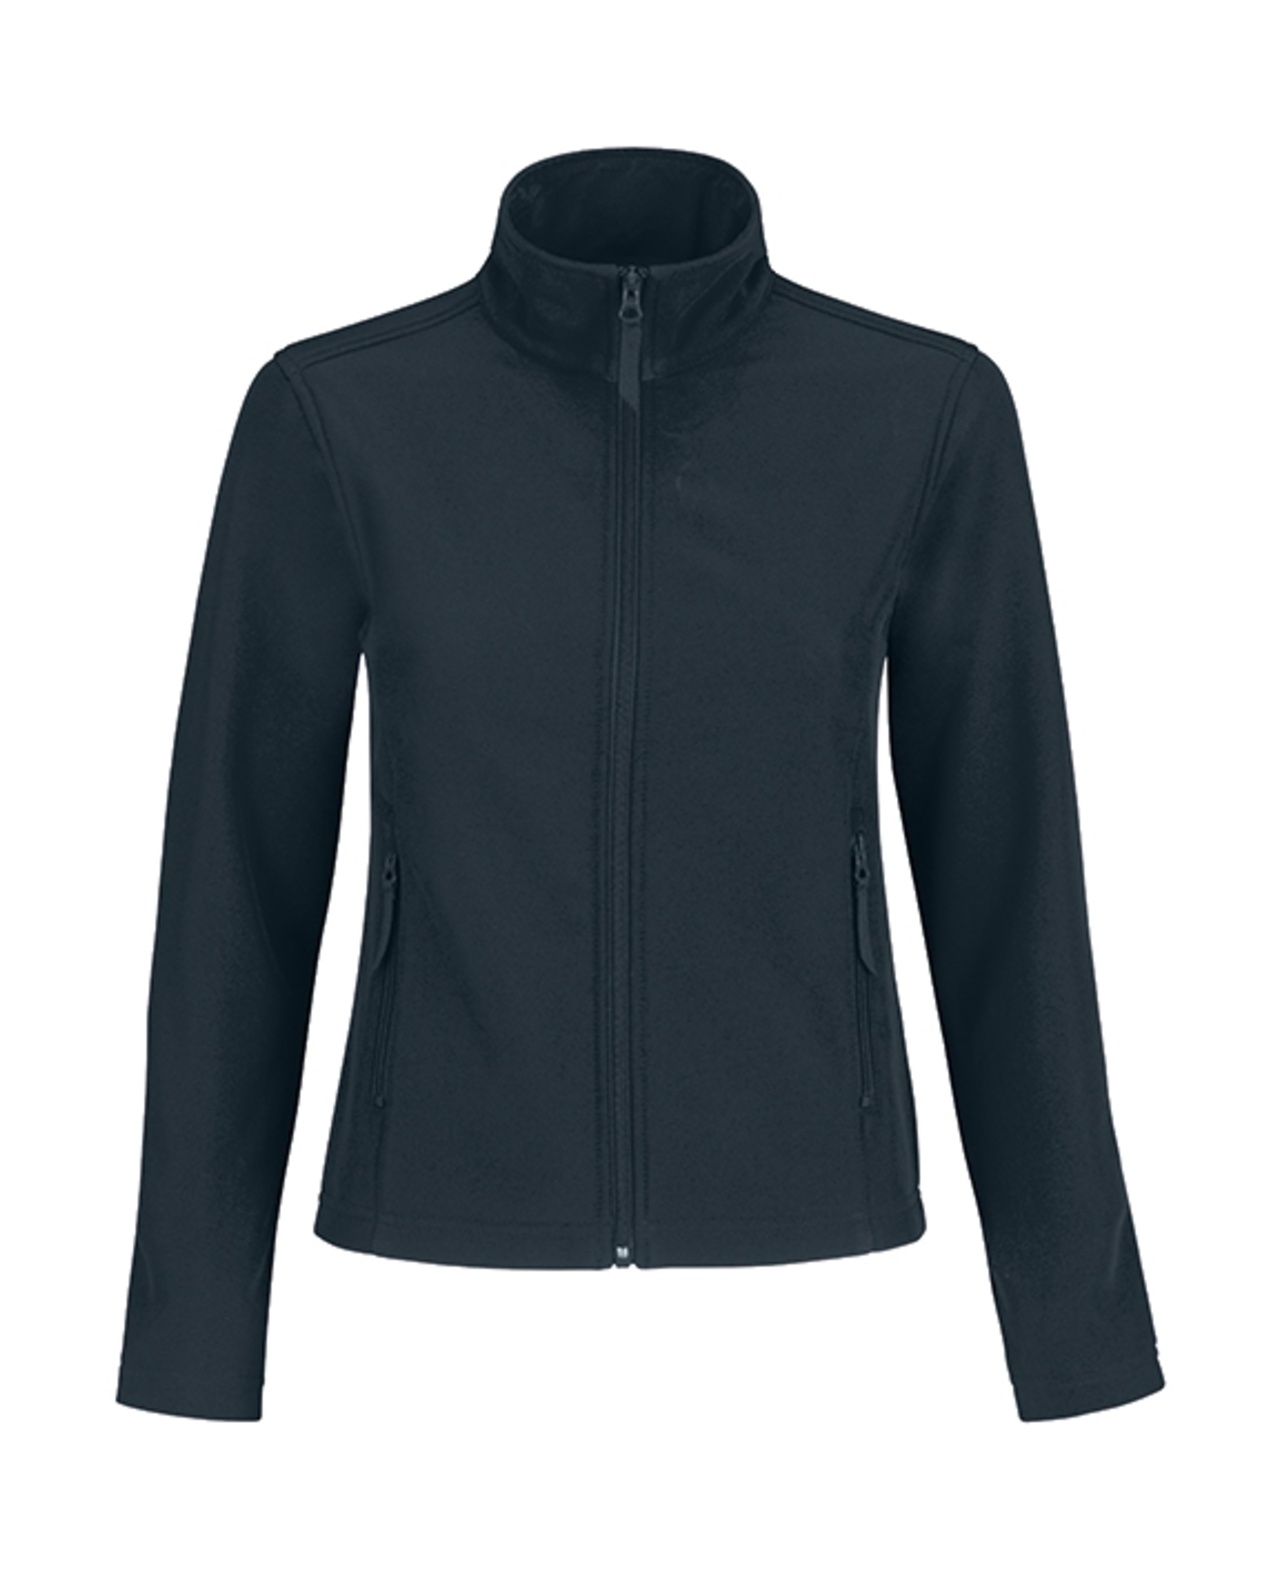 B and C Collection B&C ID.701 Softshell /women - Navy/Neon Green - M